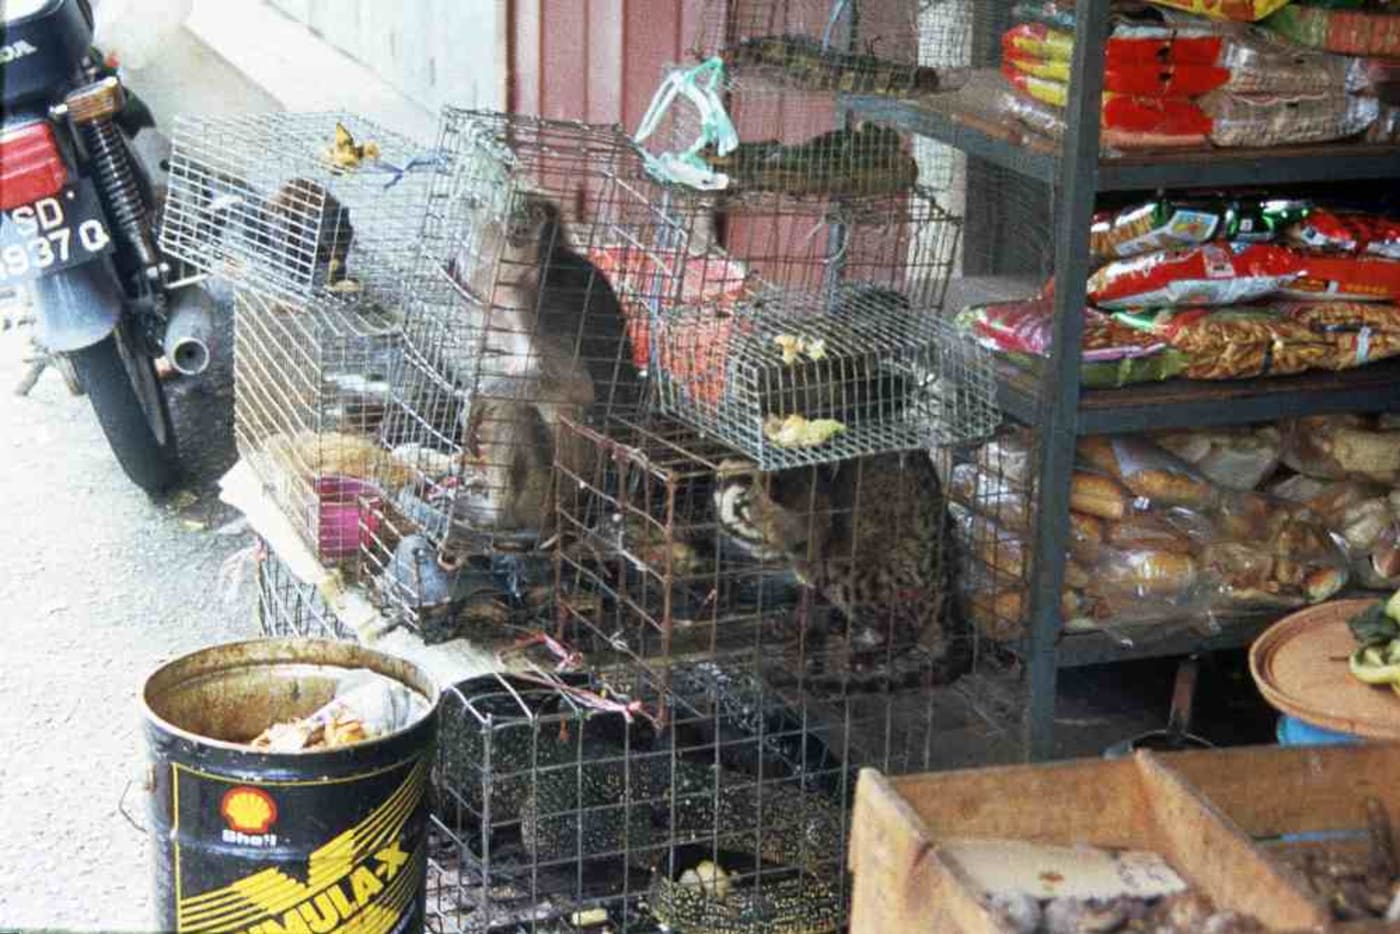 Animals for sale at an illegal wildlife market